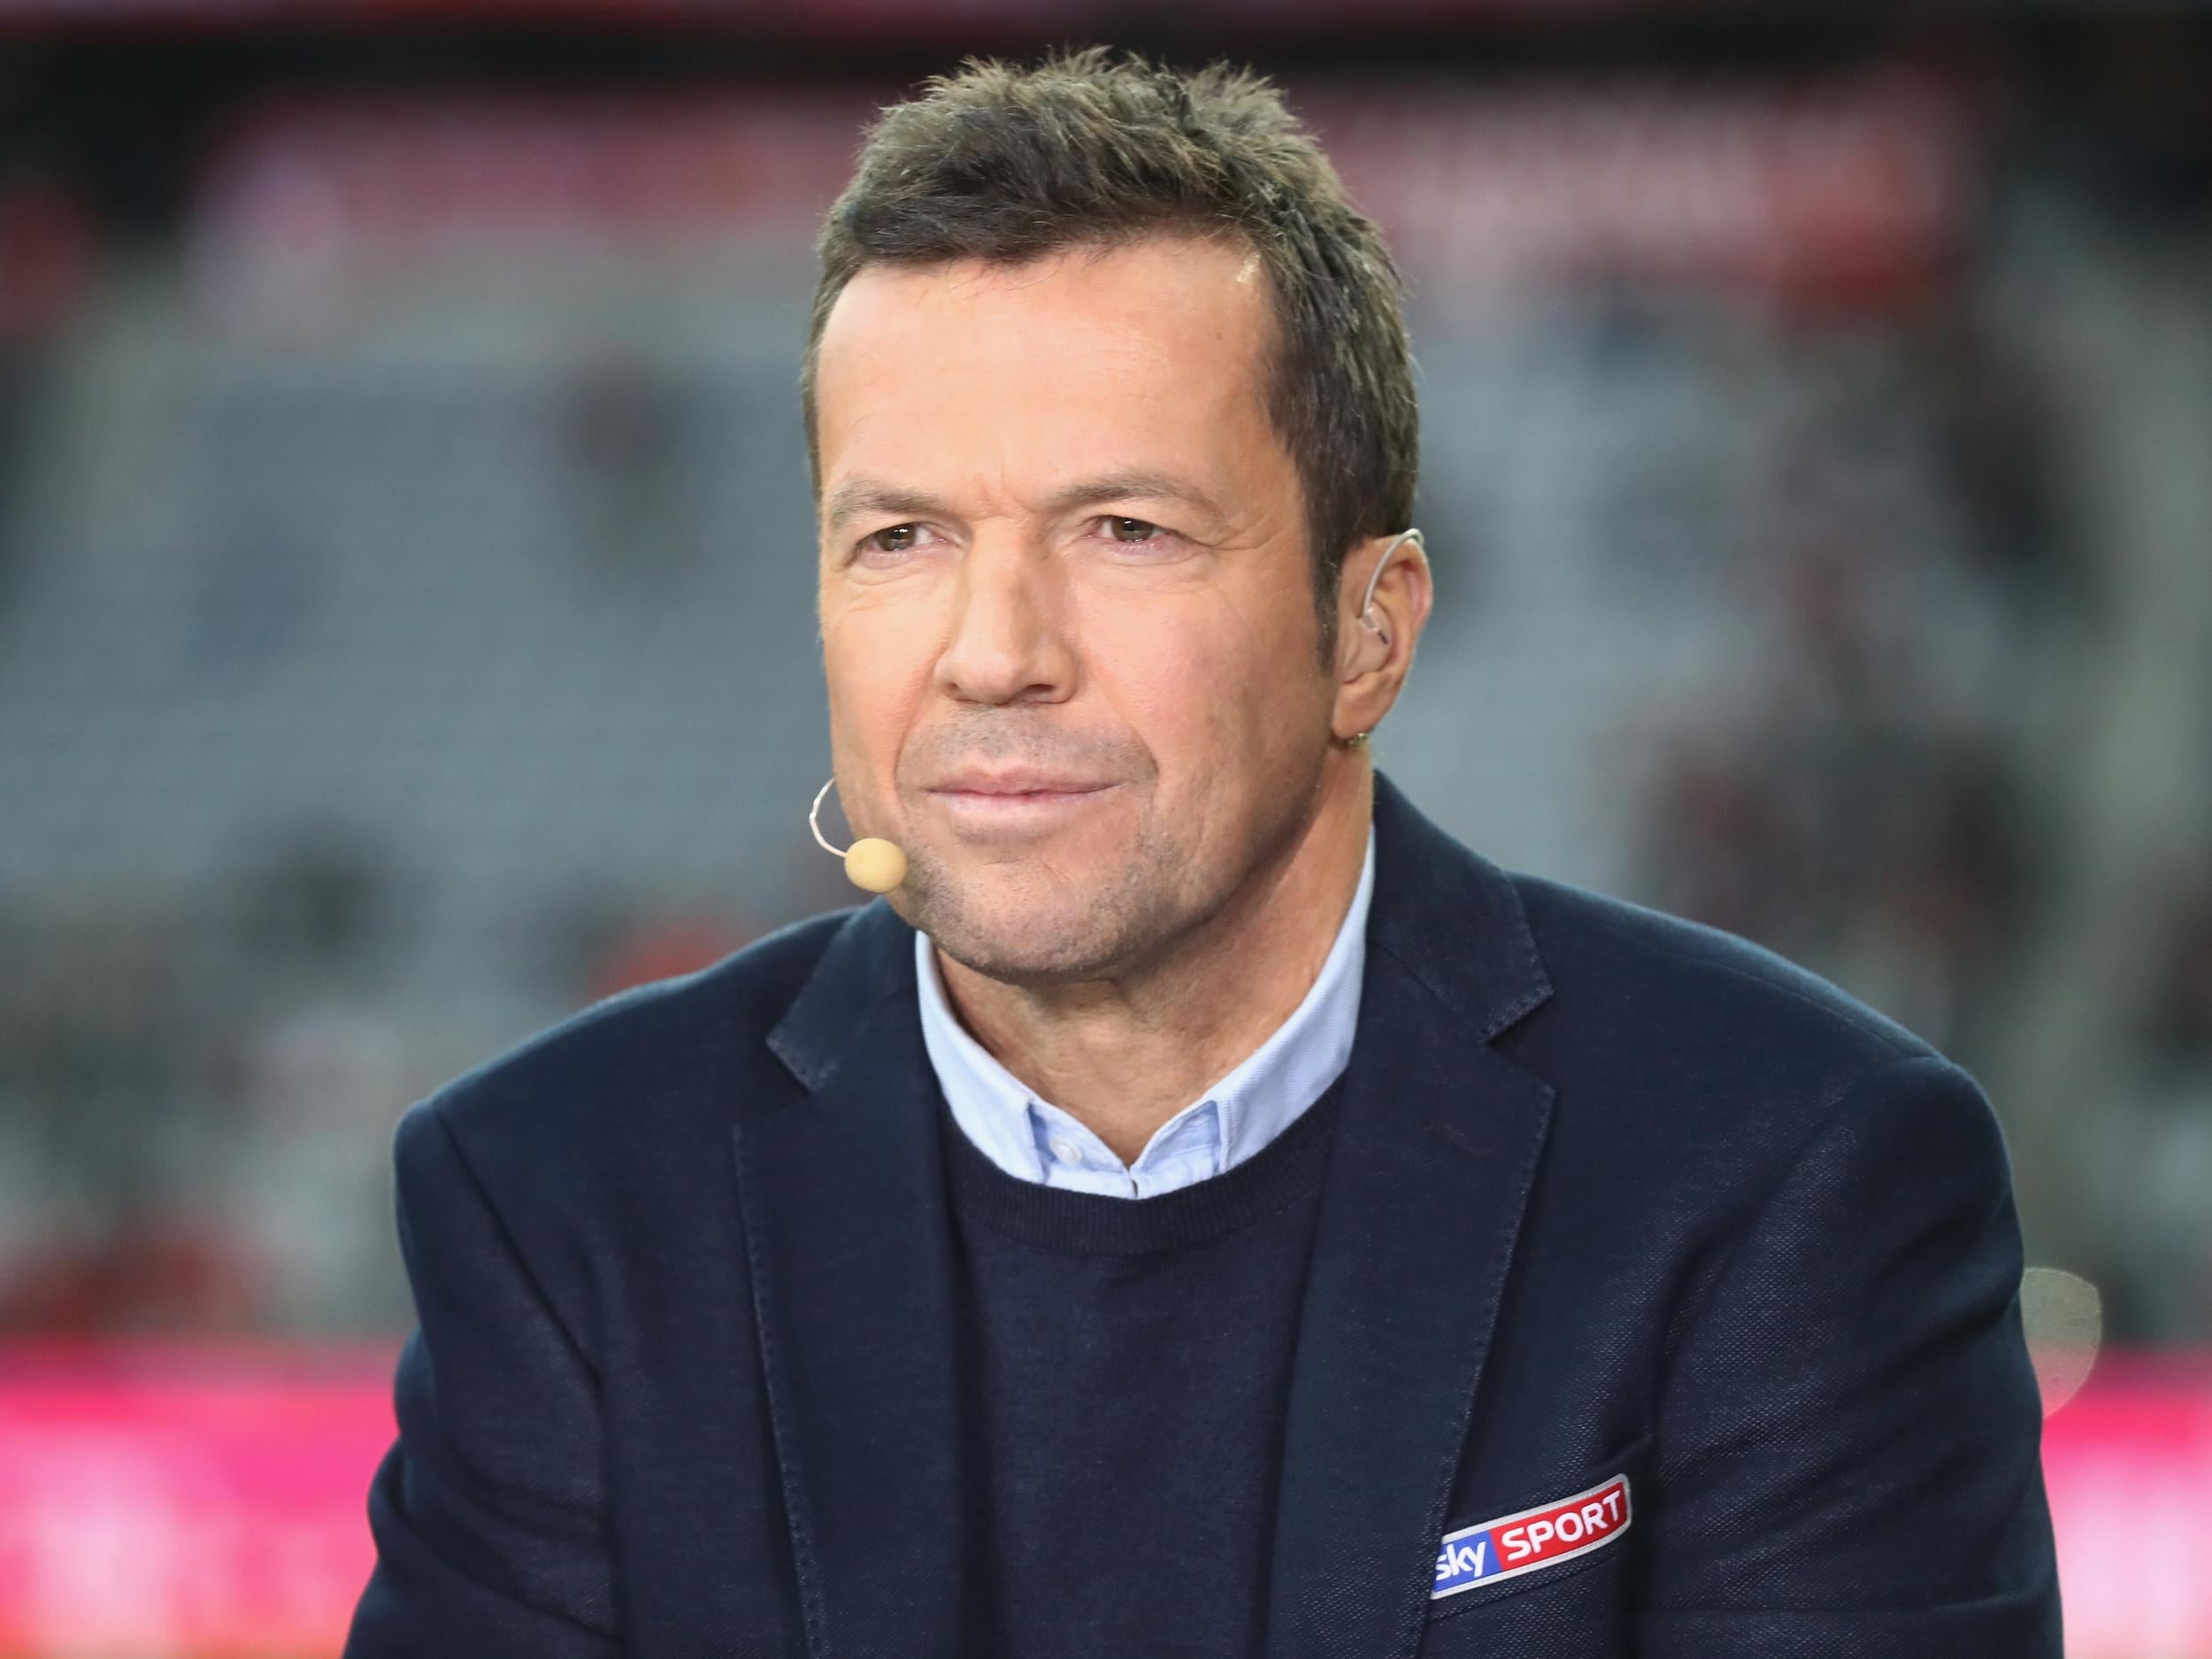 Matthaus has admitted Bayern Munich have been regularly scouting Monaco matches